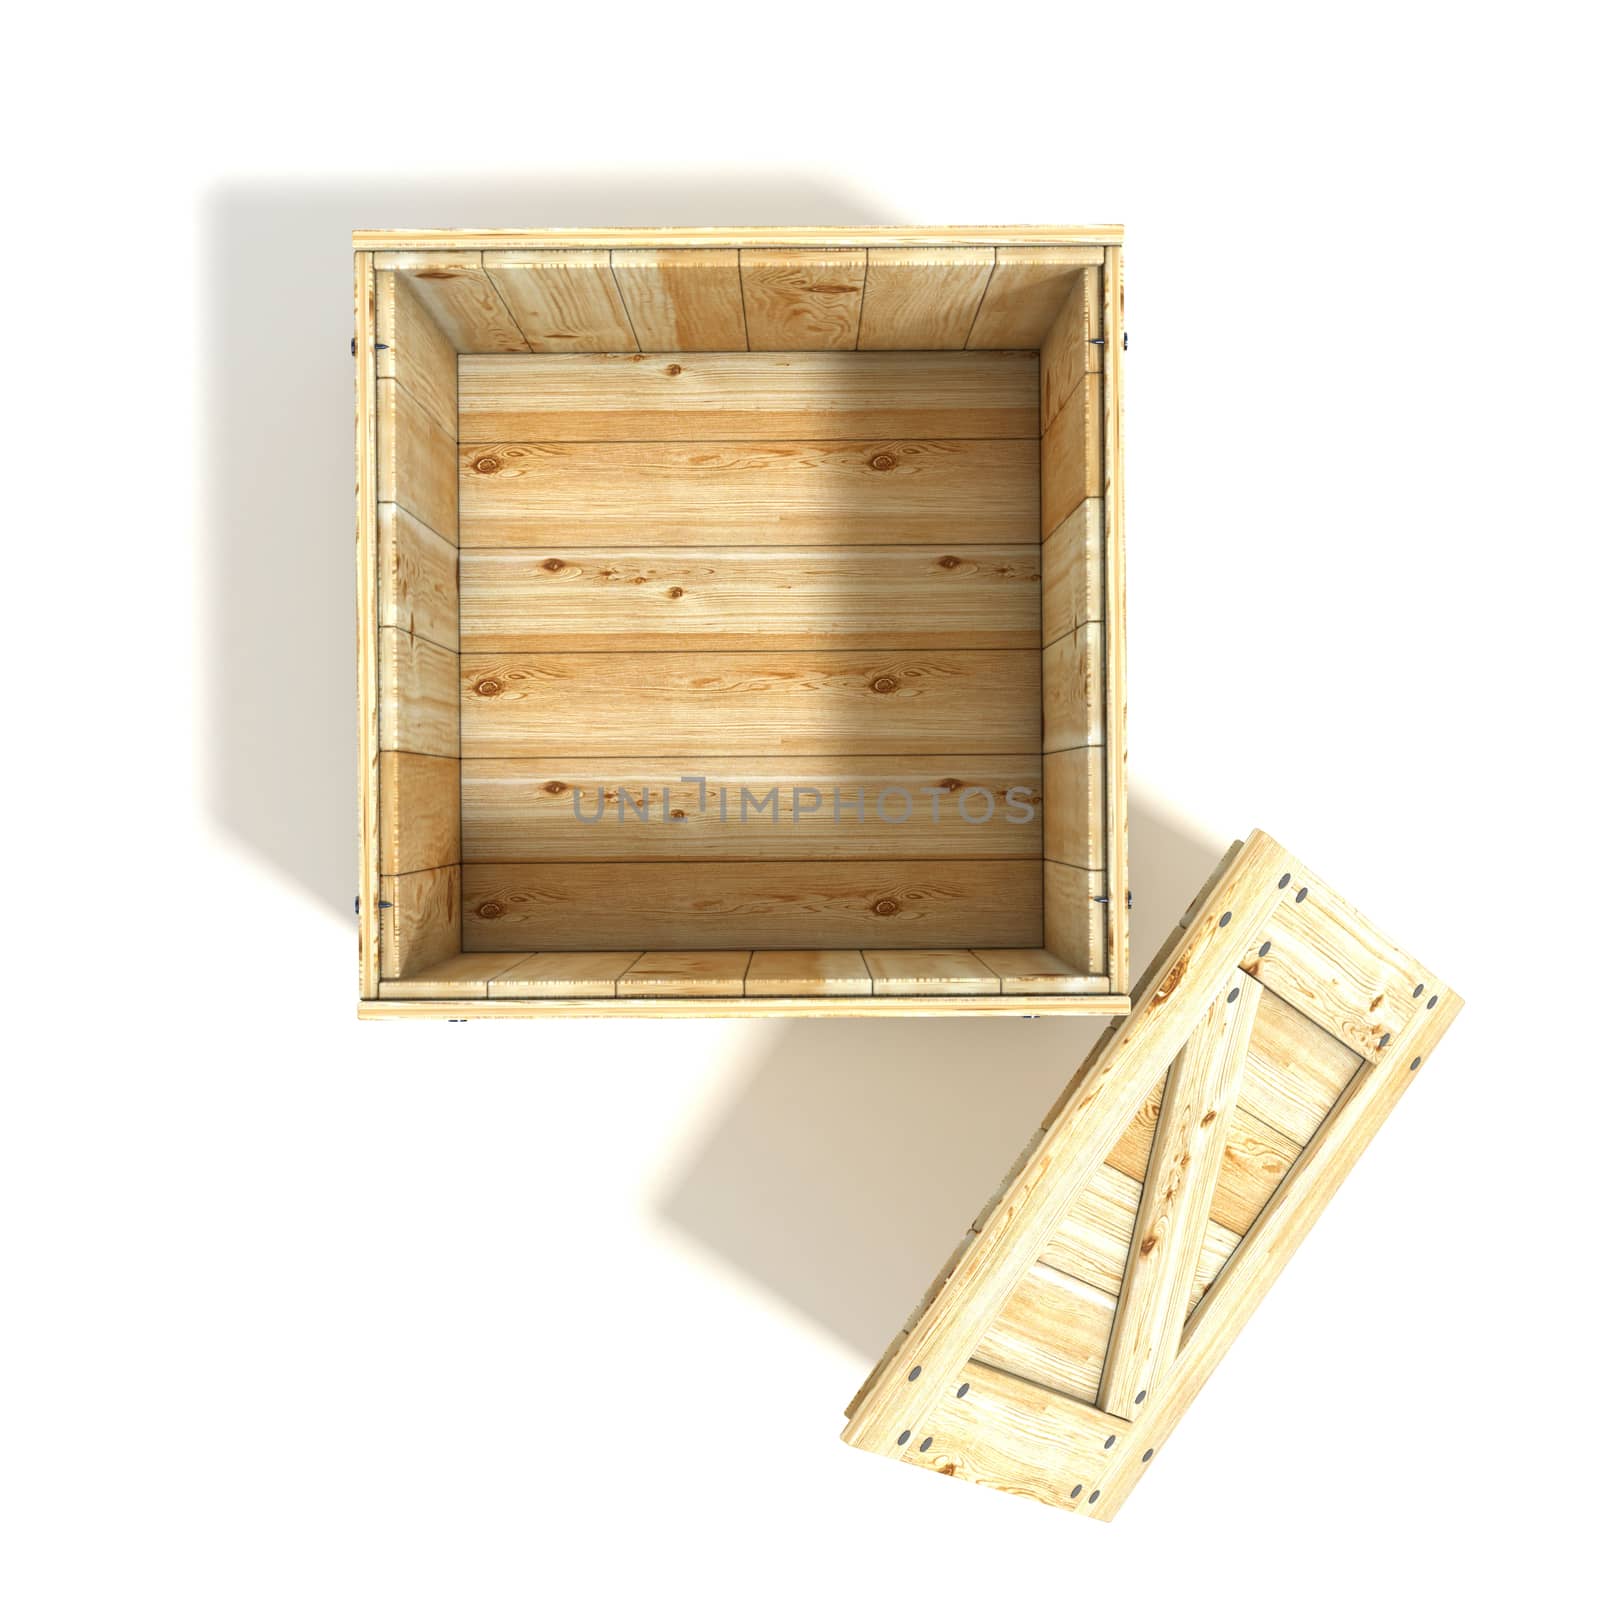 Opened wooden crate. Top view. 3D by djmilic